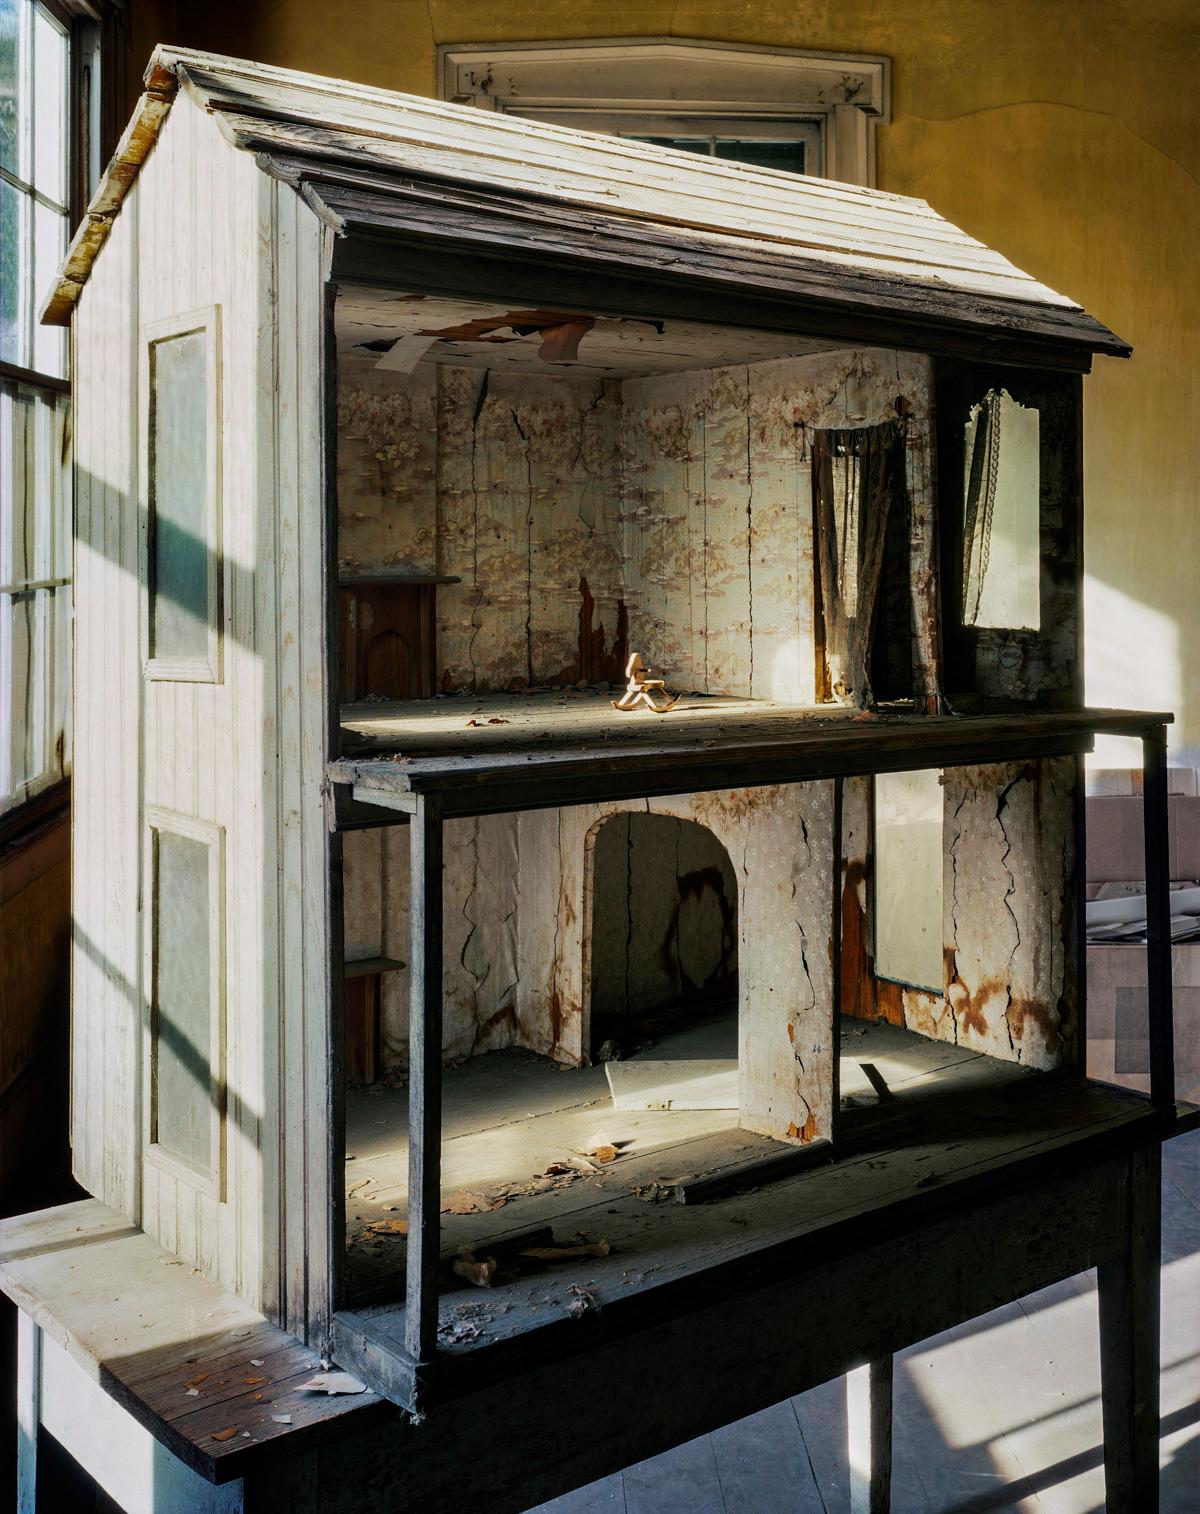 Archival Pigment Print

Doll house found in attic. Demopolis Alabama

All available sizes & editions for each size of this photograph:
40" x 30” - Edition of 5 + 2 Artist Proofs
50" X 40"- Edition of 5 + 2 Artist Proofs
60" X 50"-  Edition of 5 + 2